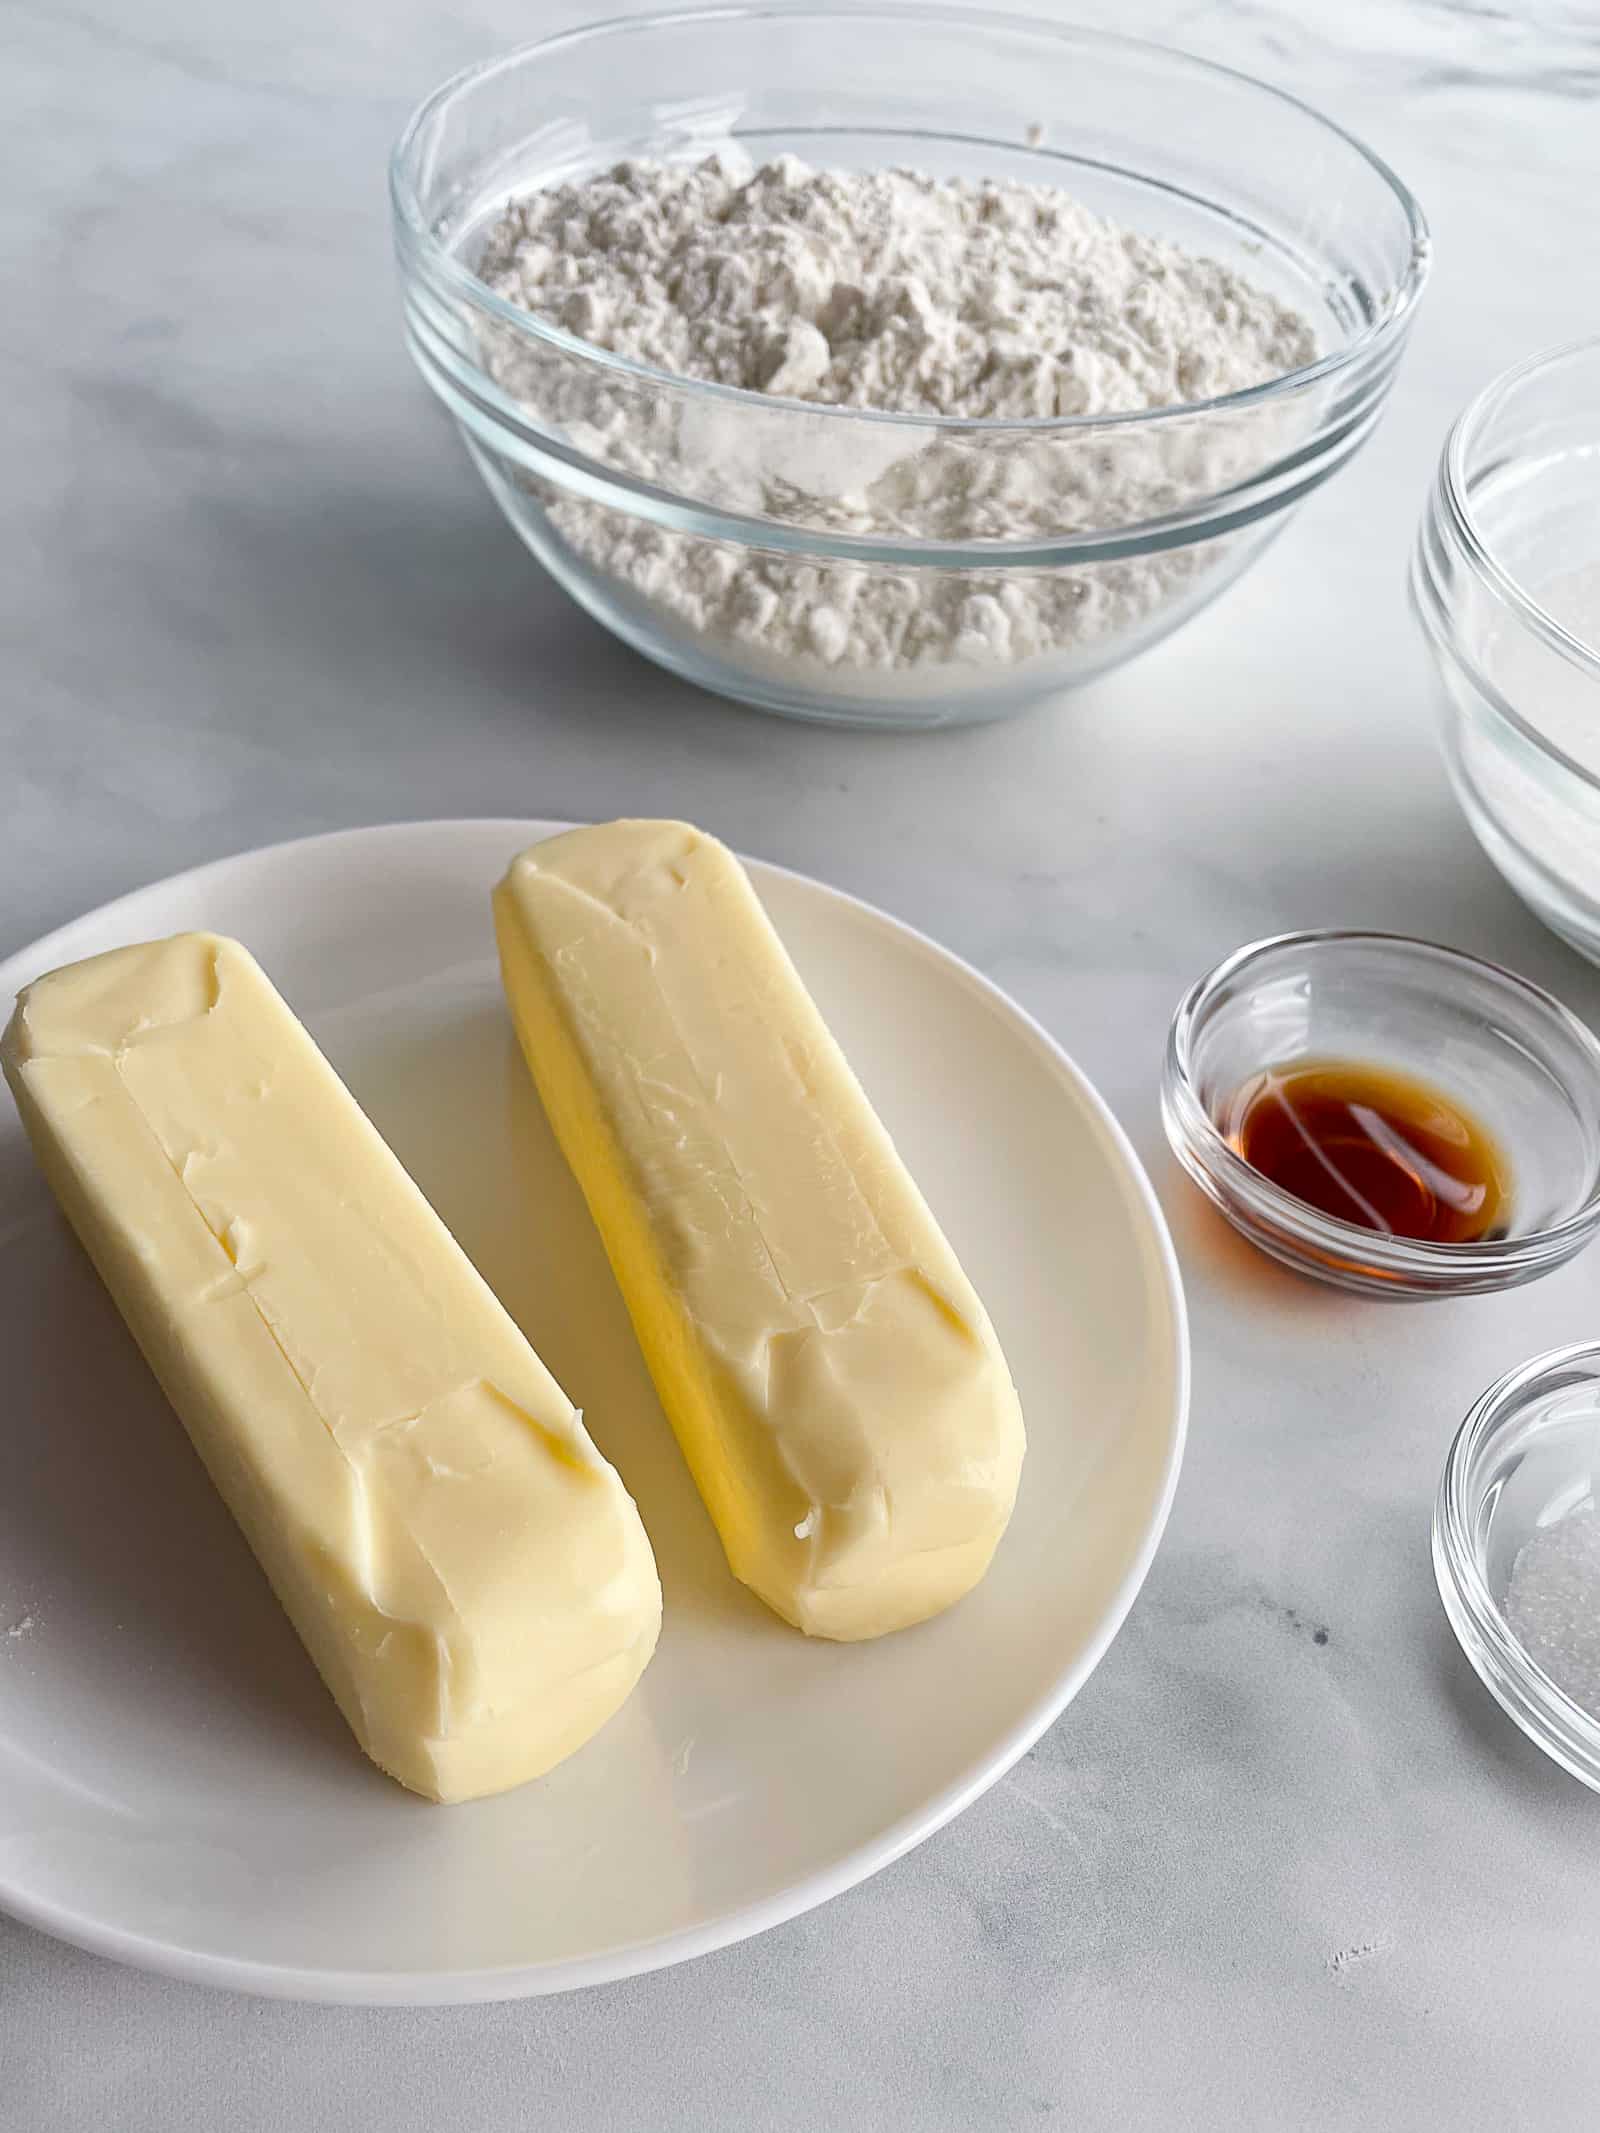 Ingredients for gluten-free shortbread. Two sticks of butter are up front on a plate. Gluten-free flour, sugar, vanilla, and salt are in the background.